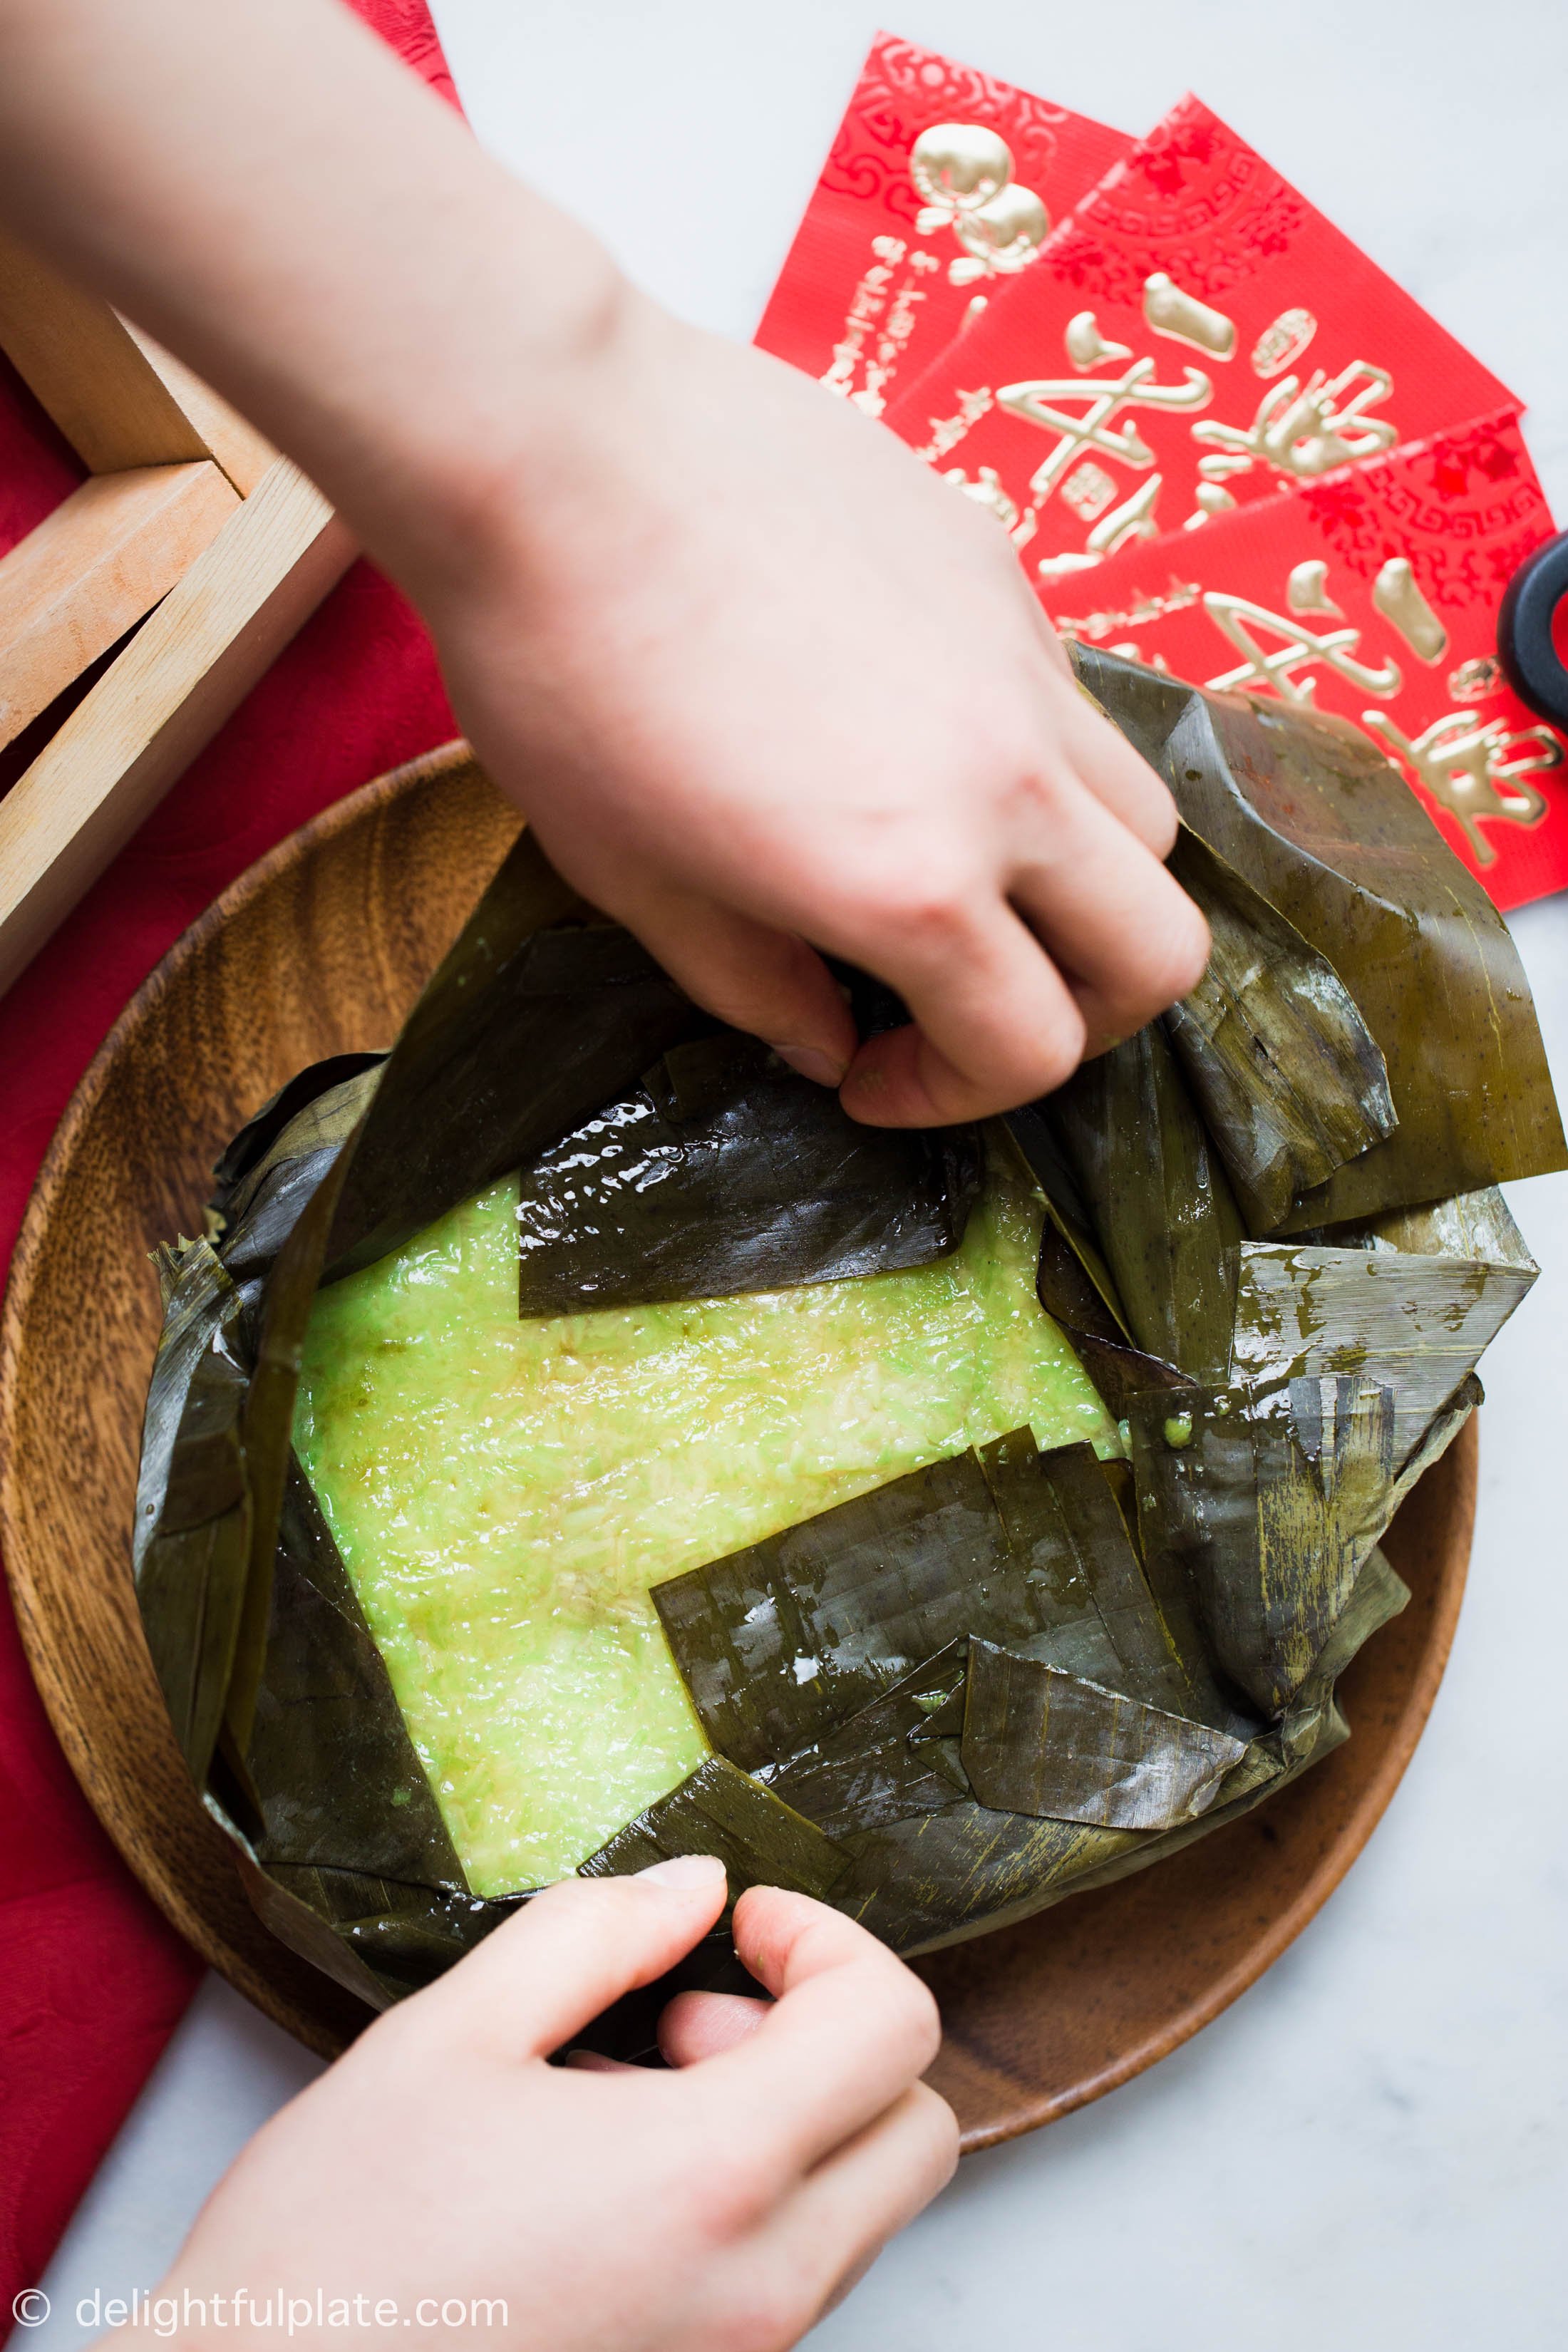 Vietnamese Square Sticky Rice Cake (Banh Chung) is a traditional cake for Lunar New Year celebration. The cake is so delicious with fragrant sticky rice, creamy mung bean filling and tender pork.